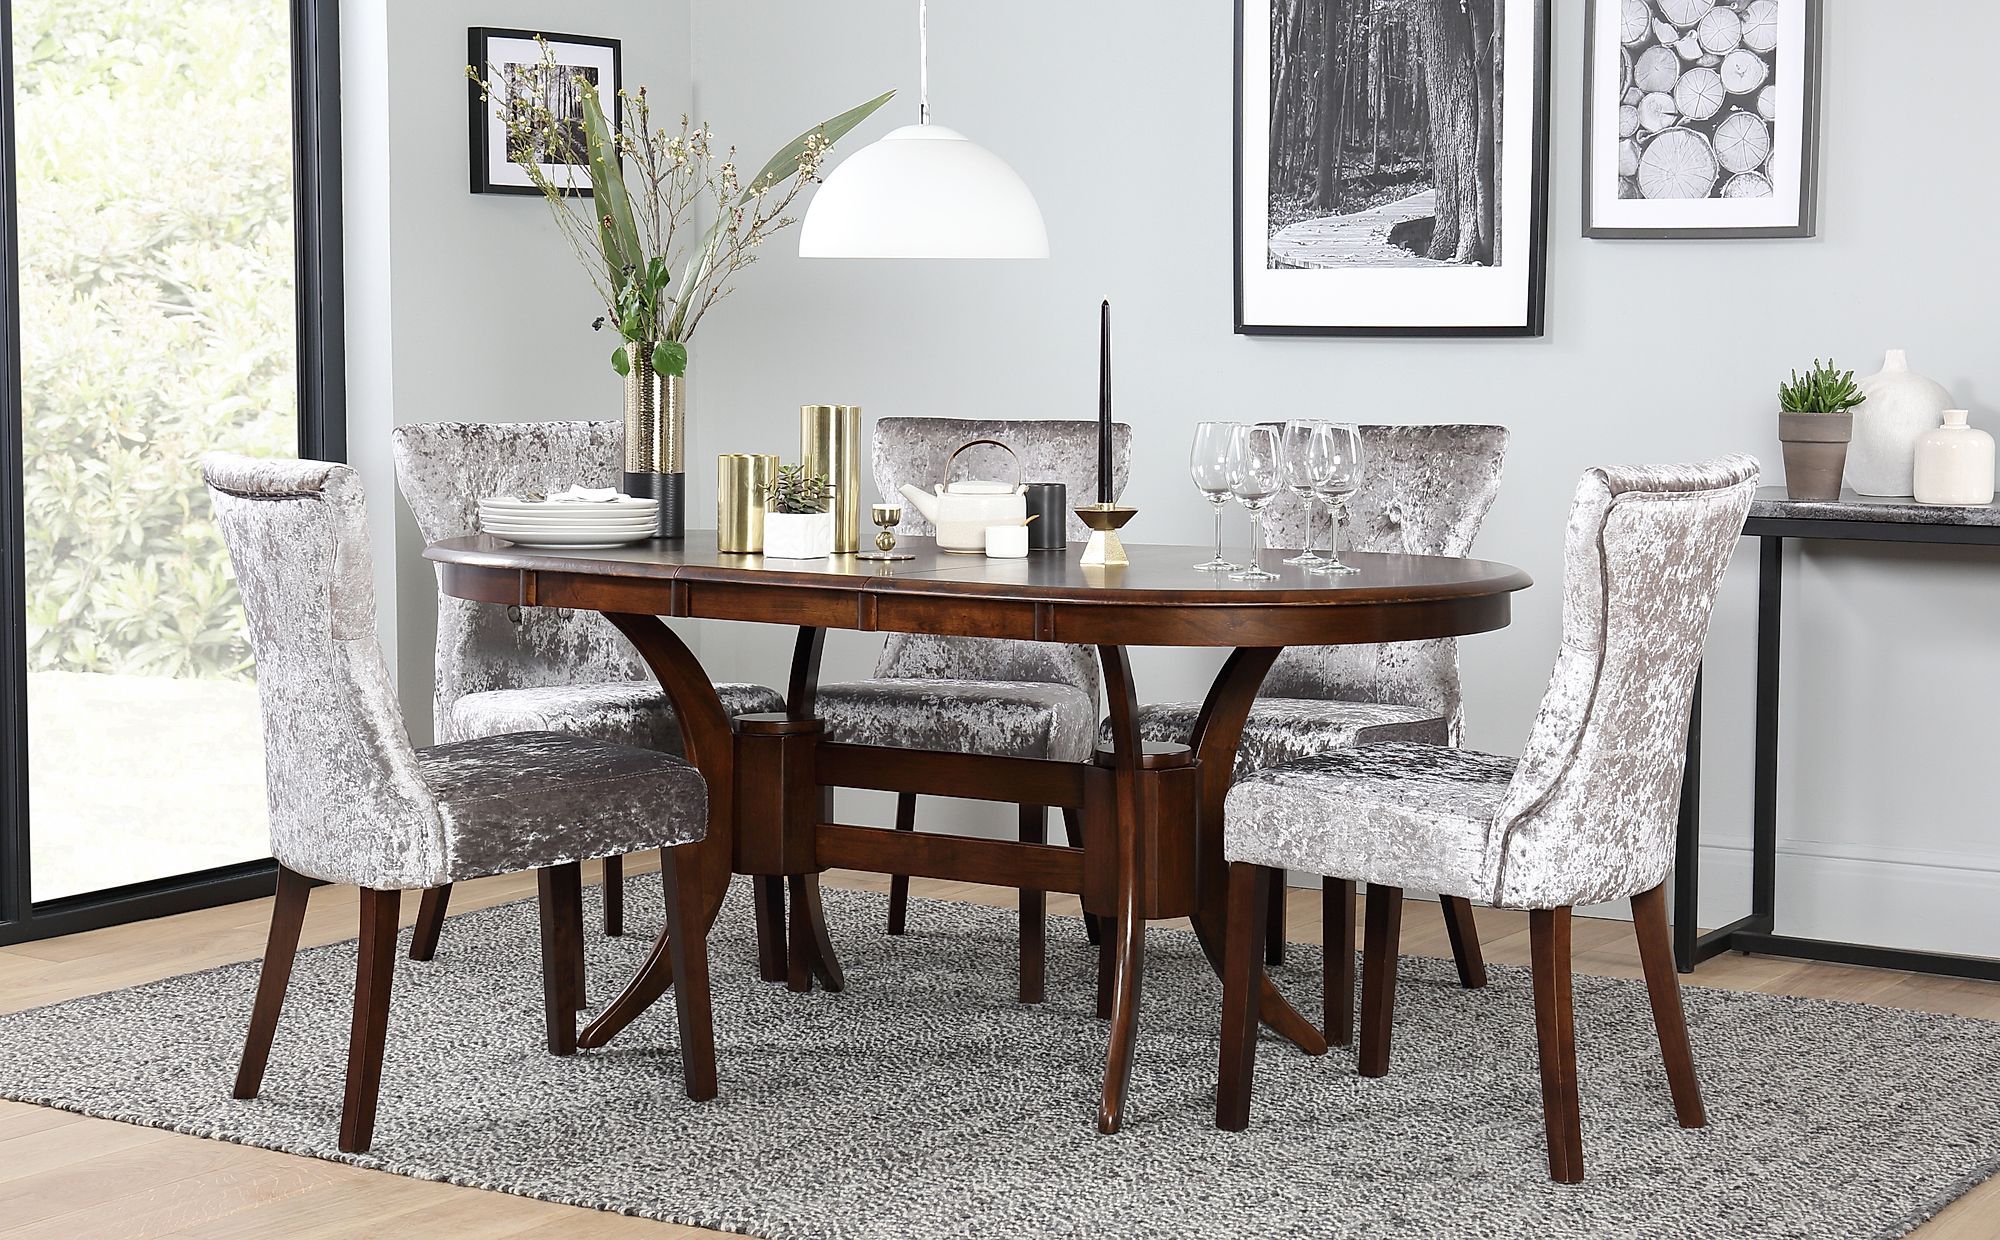 Townhouse Oval Dark Wood Extending Dining Table With 4 Bewley Silver With Regard To Extendable Oval Dining Sets (View 9 of 15)